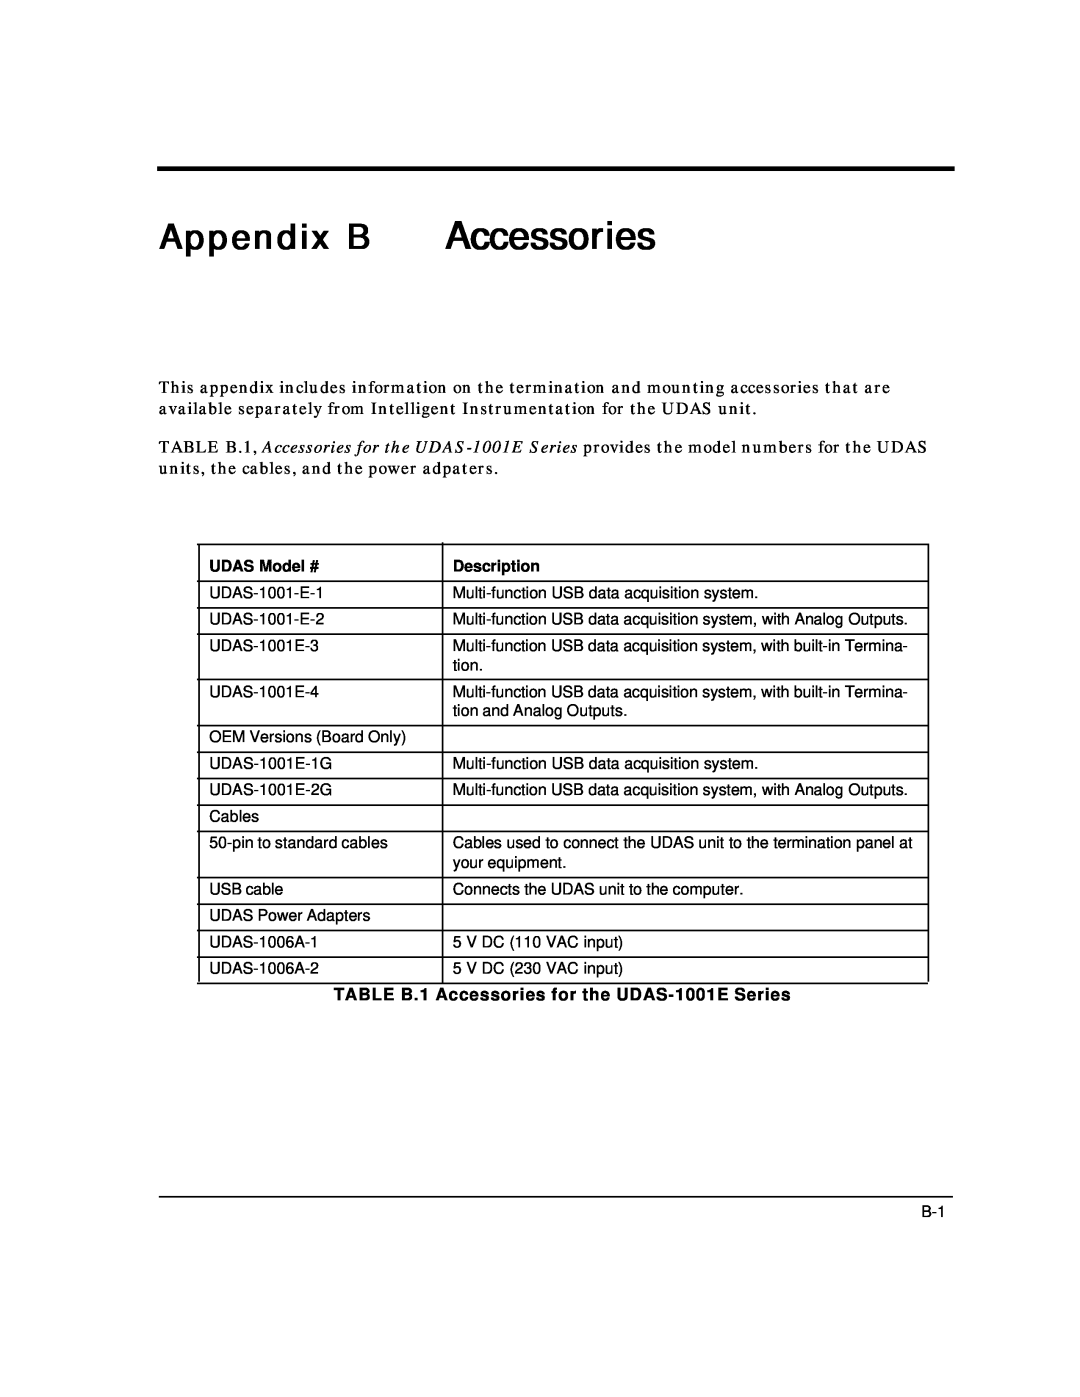 Intelligent Motion Systems user manual Appendix B, TABLE B.1 Accessories for the UDAS-1001E Series 